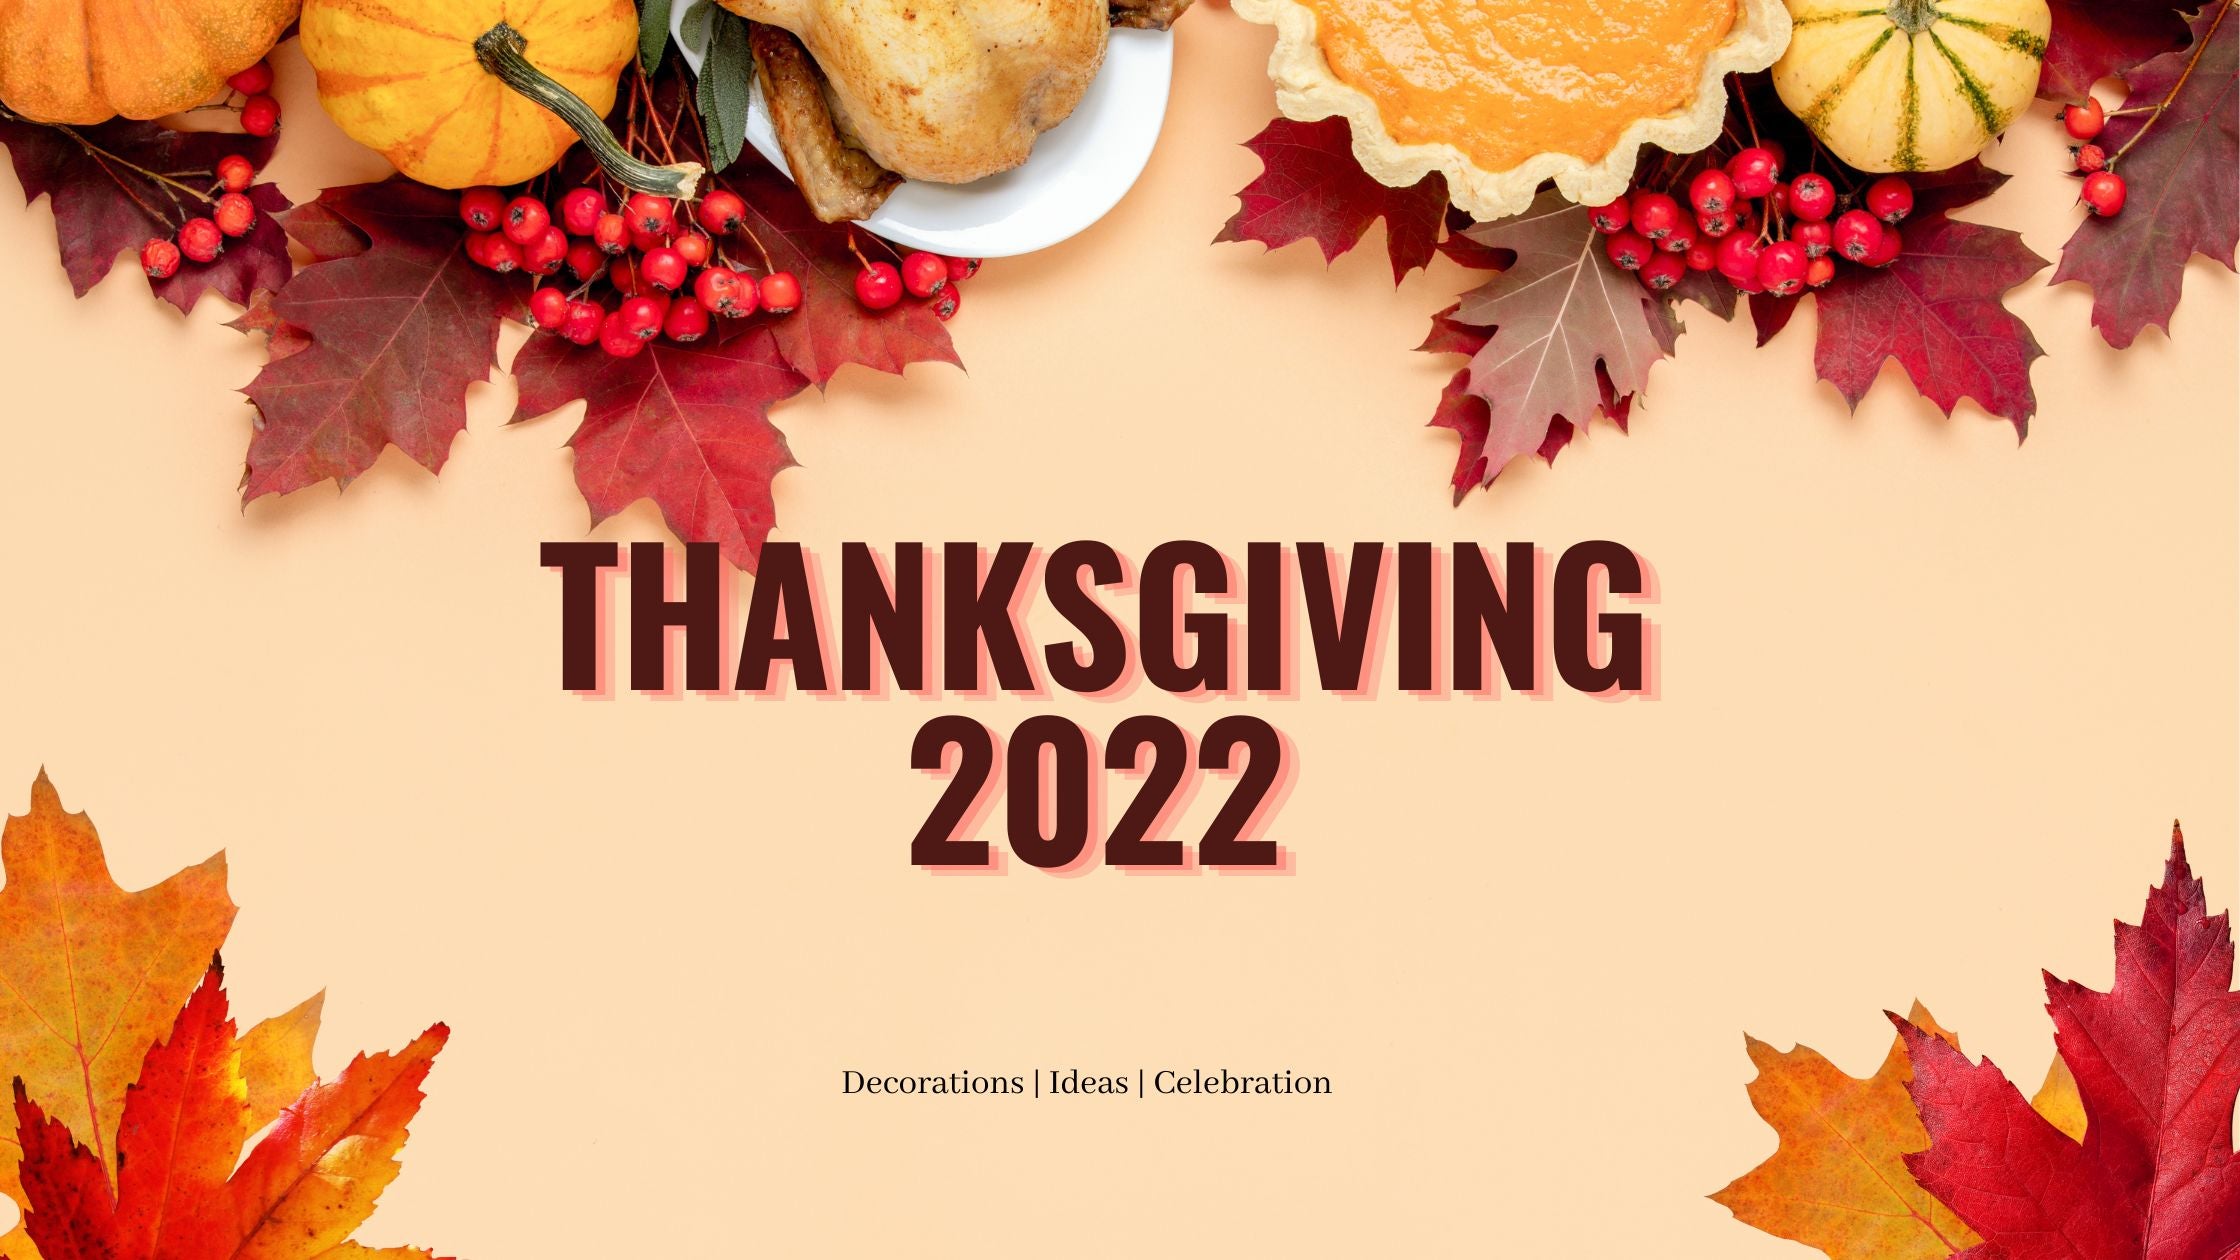 Thanksgiving 2022: Simple ideas to decorate your celebration